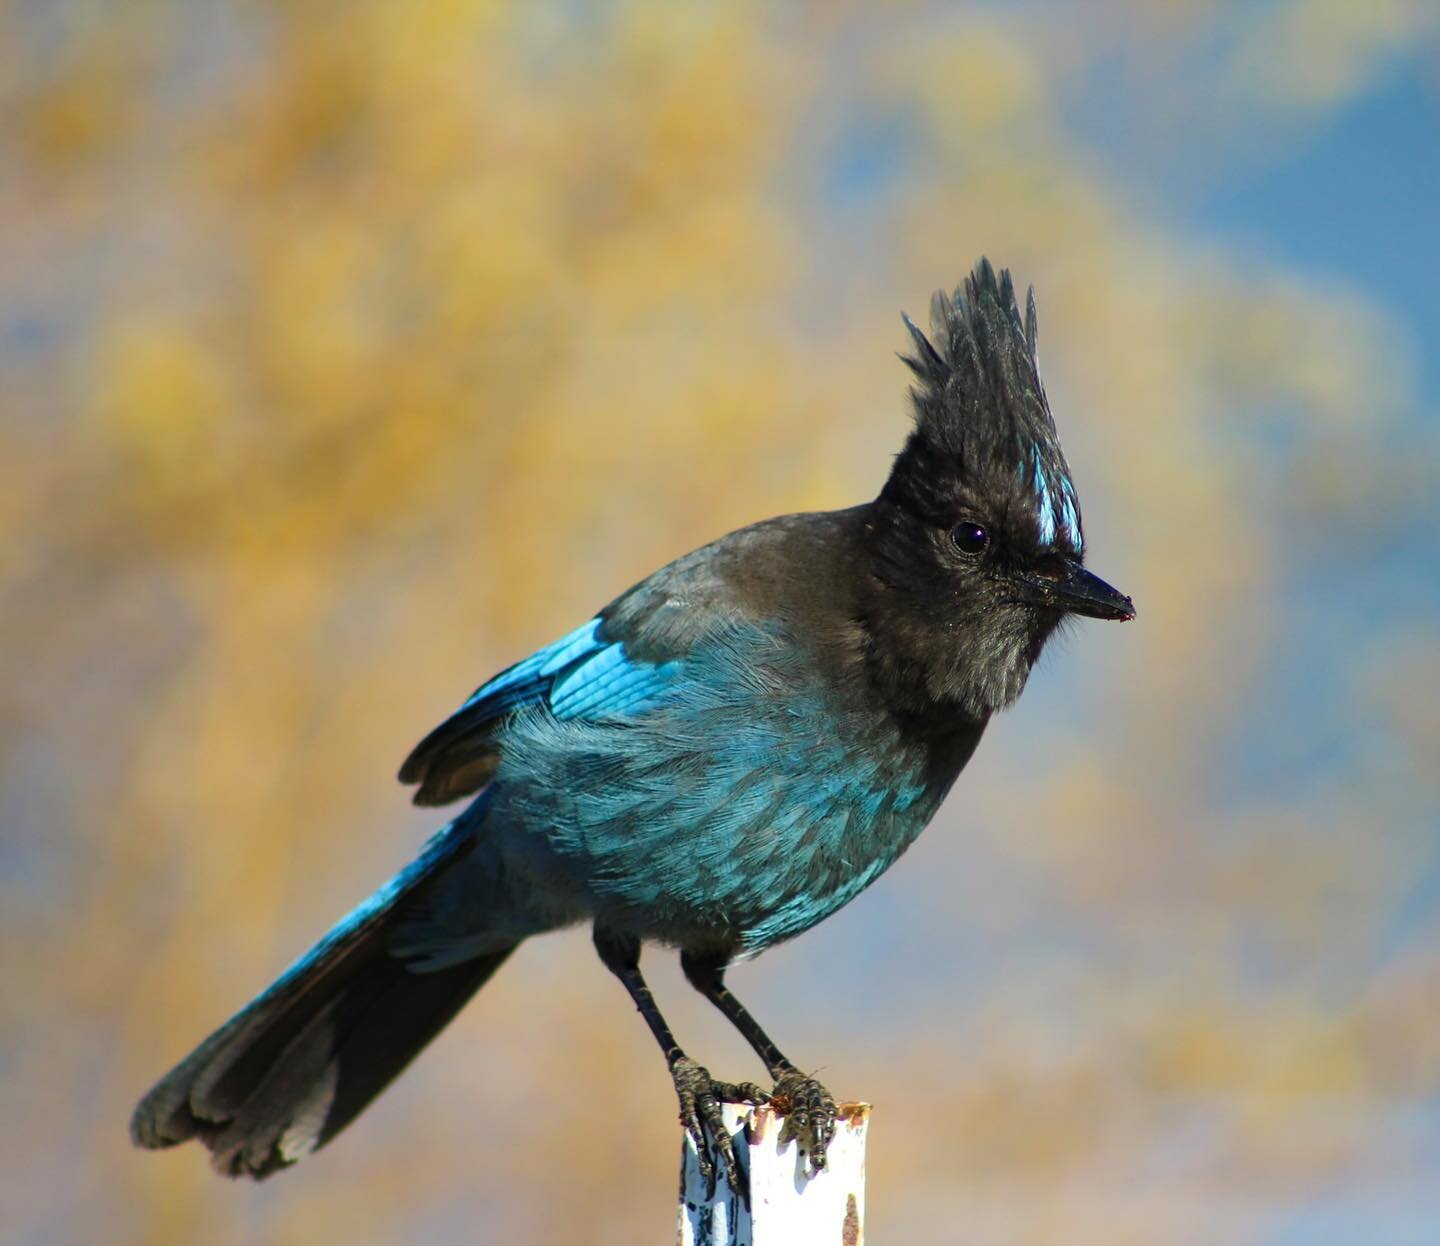 SQUAWWWWK&hellip; 🎵 

Please excuse this Steller&rsquo;s Jay&rsquo;s absurd vocalization&hellip; What we were trying to say is, Happy 2022 Everyone!

Great capture, @ksmadsen 📸